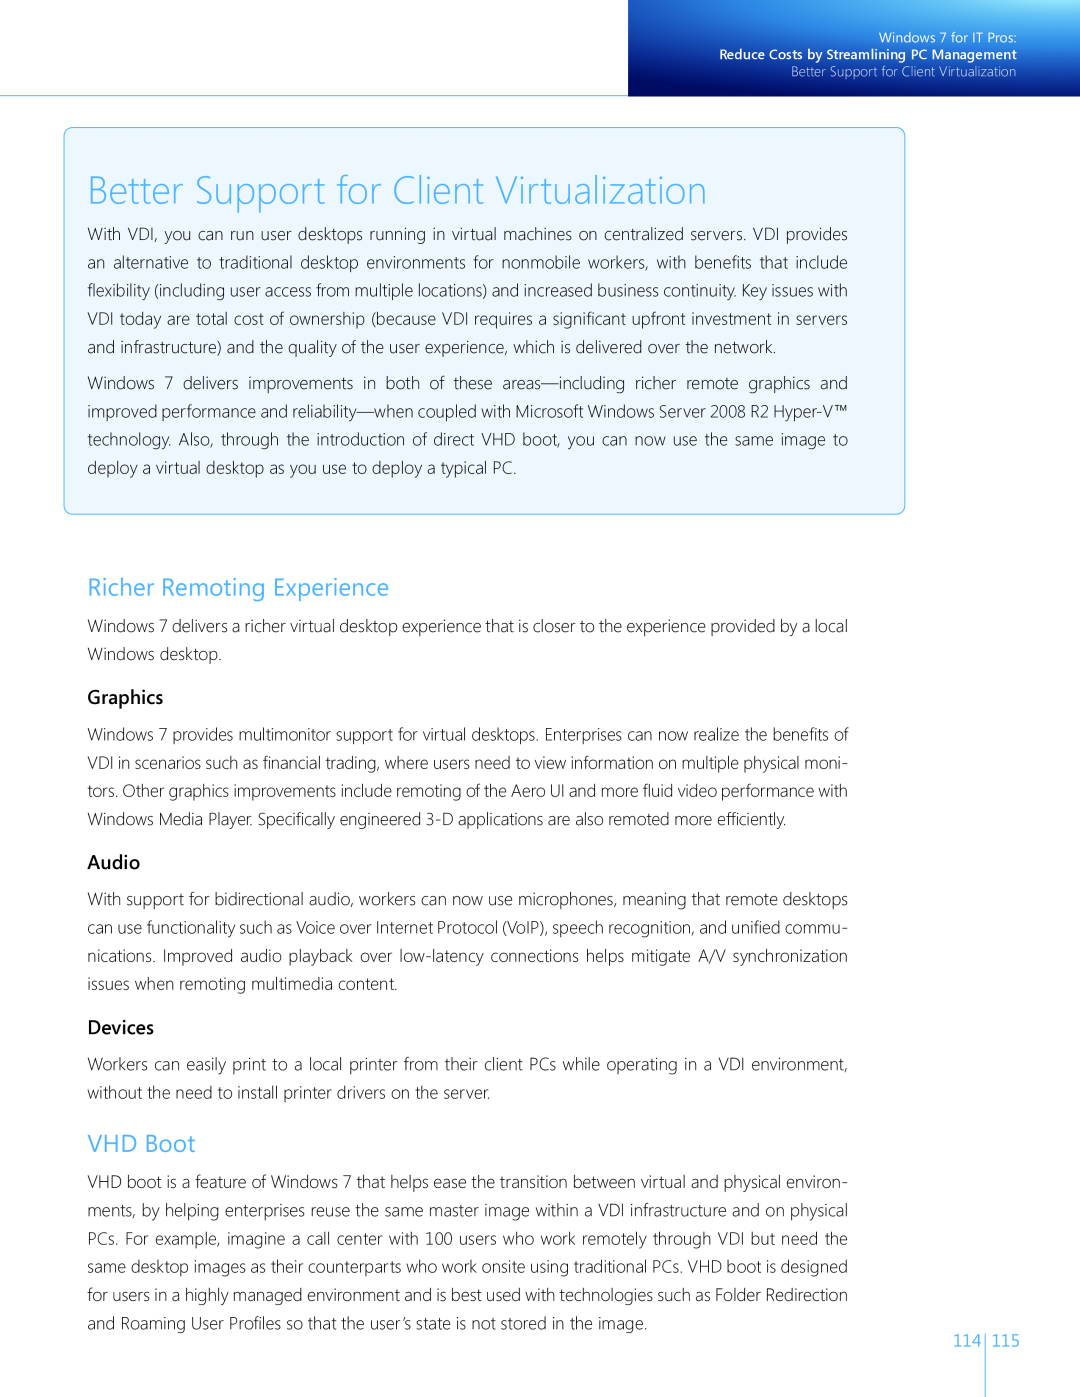 Microsoft FQC01156 manual Better Support for Client Virtualization, Richer Remoting Experience, VHD Boot, Graphics, Audio 